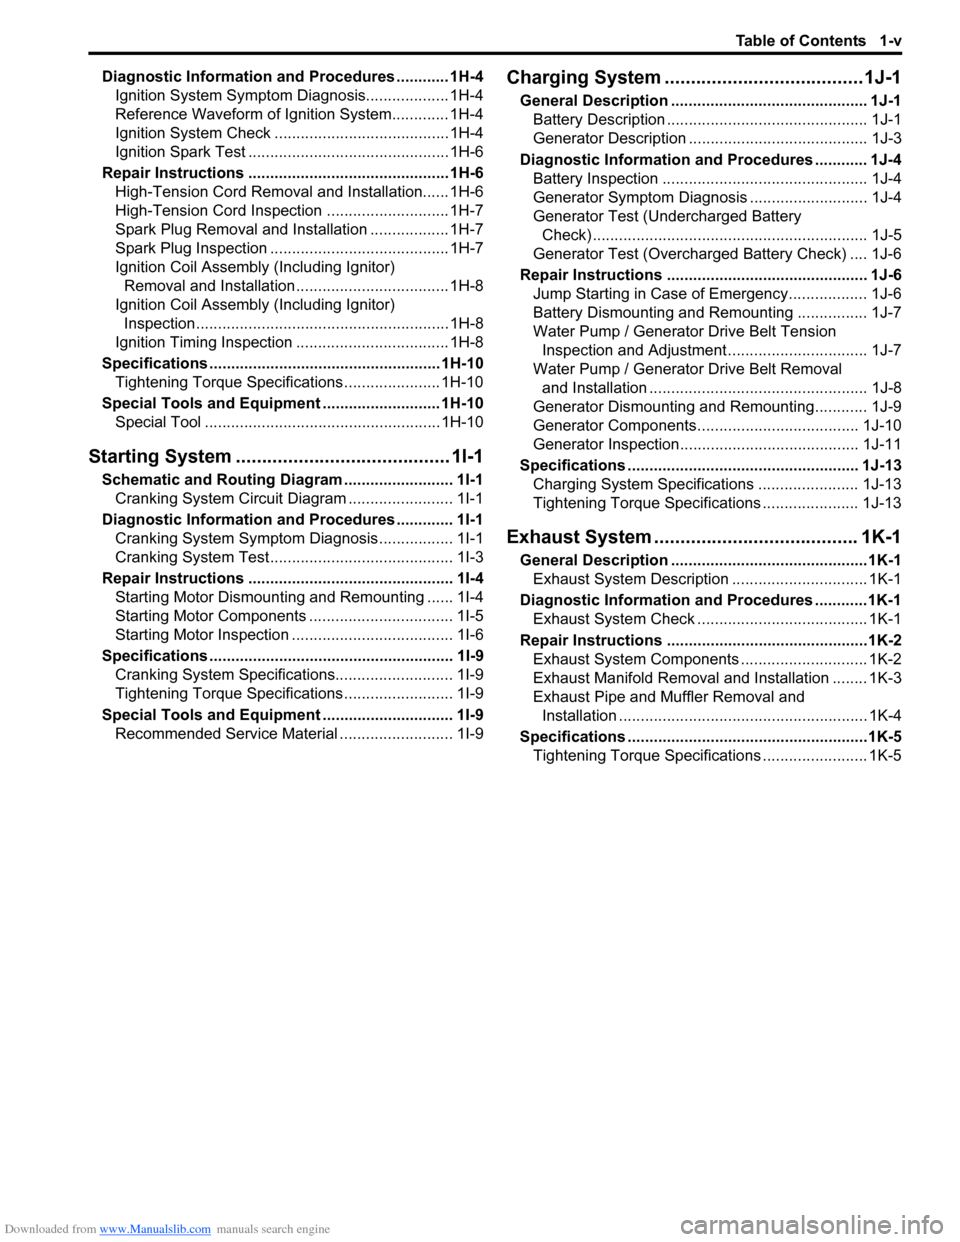 SUZUKI SX4 2006 1.G Service Service Manual Downloaded from www.Manualslib.com manuals search engine Table of Contents 1-v
Diagnostic Information and Procedures ............ 1H-4
Ignition System Symptom Diagnosis................... 1H-4
Referen